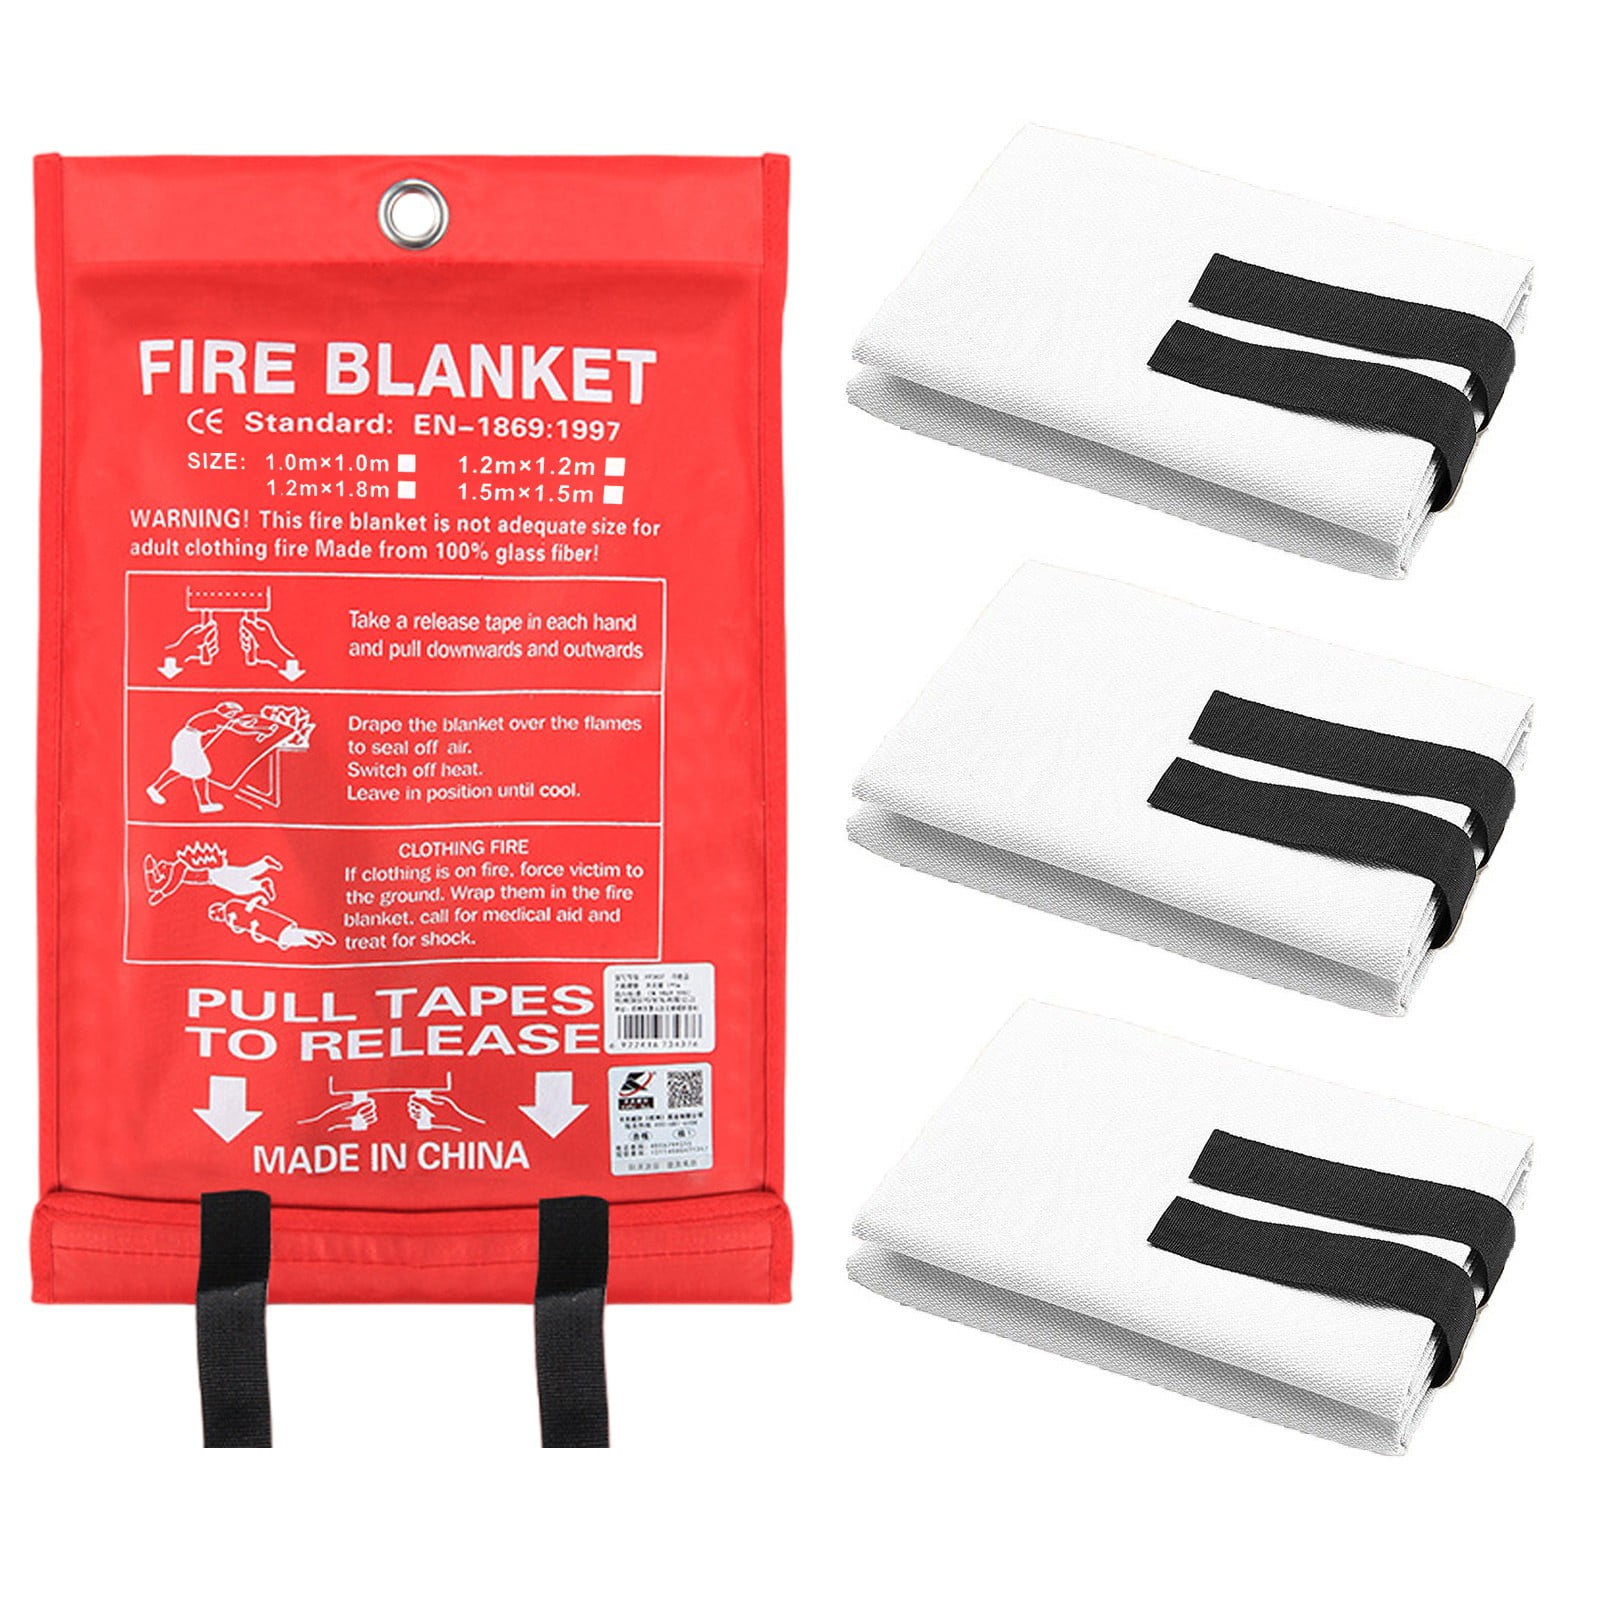 SITERWELL Fire Blanket , Fiberglass Fire Suppression Blanket for Emergency  Surival，Emergency Blanket with Flame retardant protection and Heat